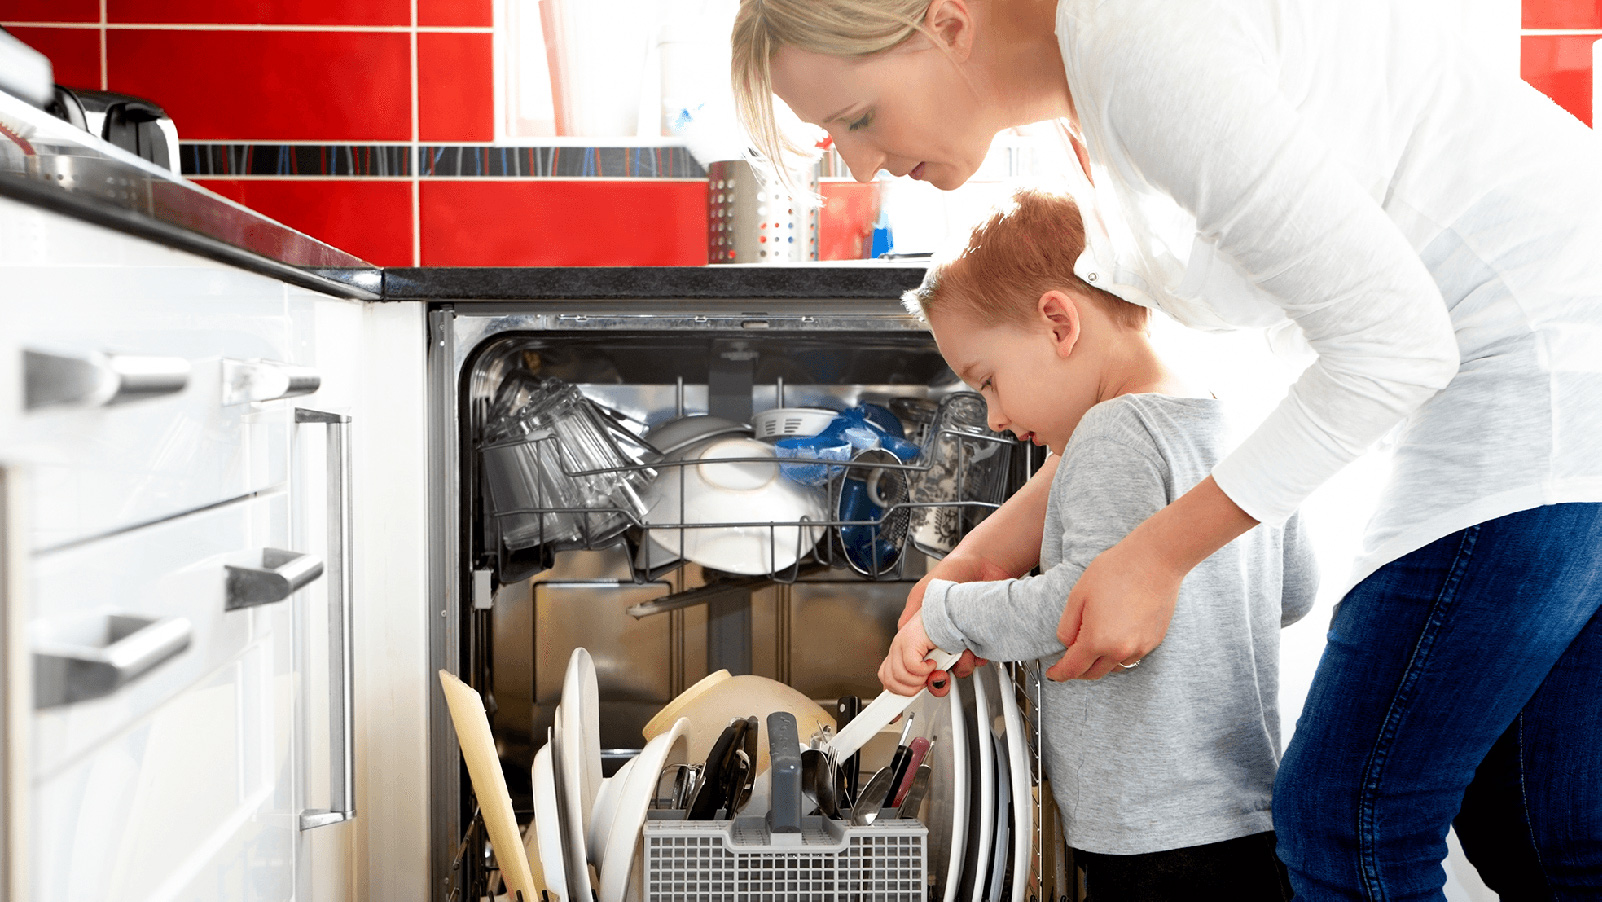 Little boy helping his mother load the dishwasher.